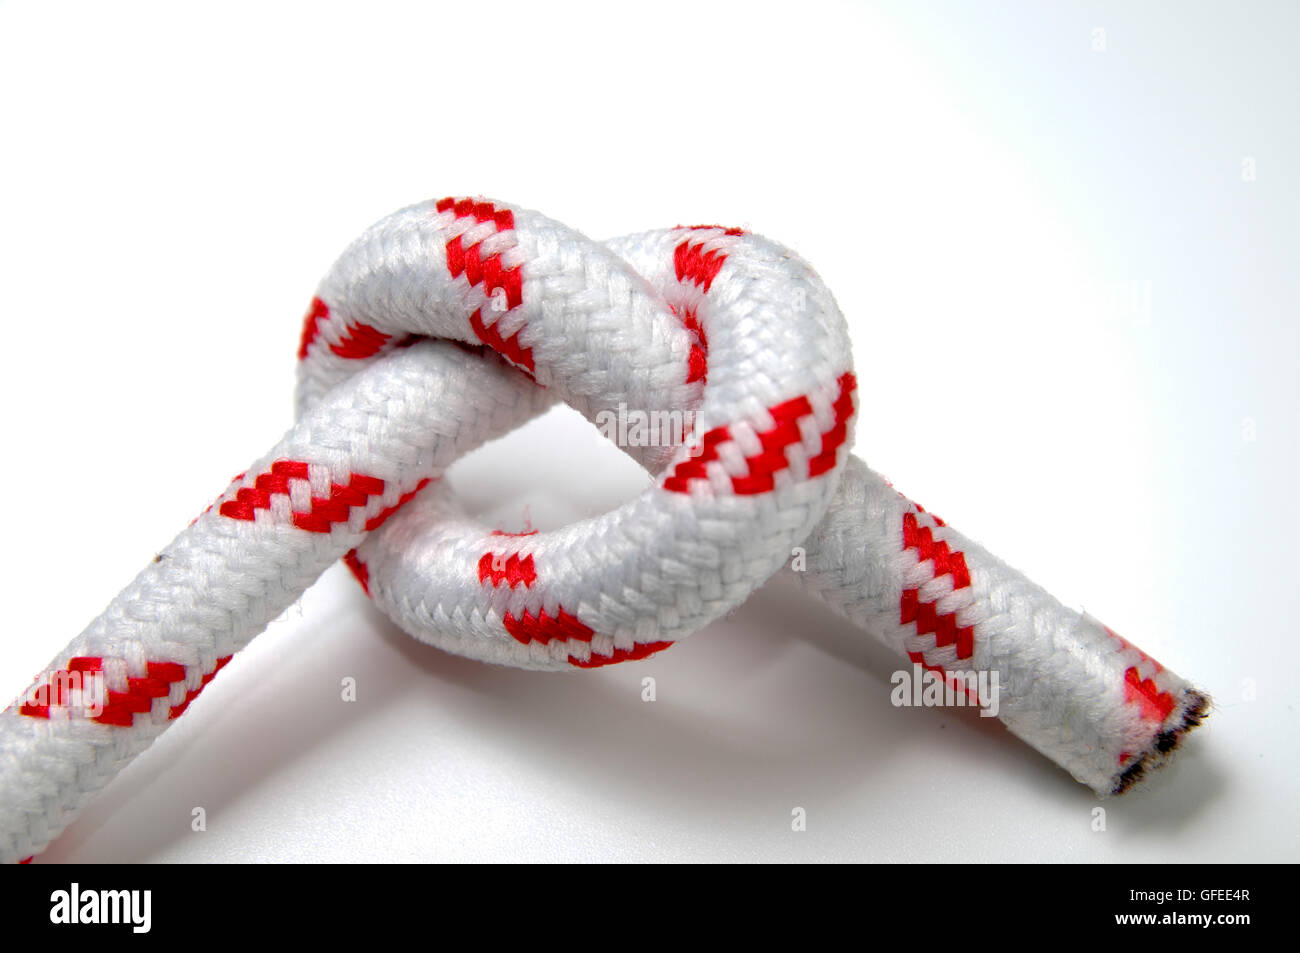 Overhand Knot on white background Stock Photo